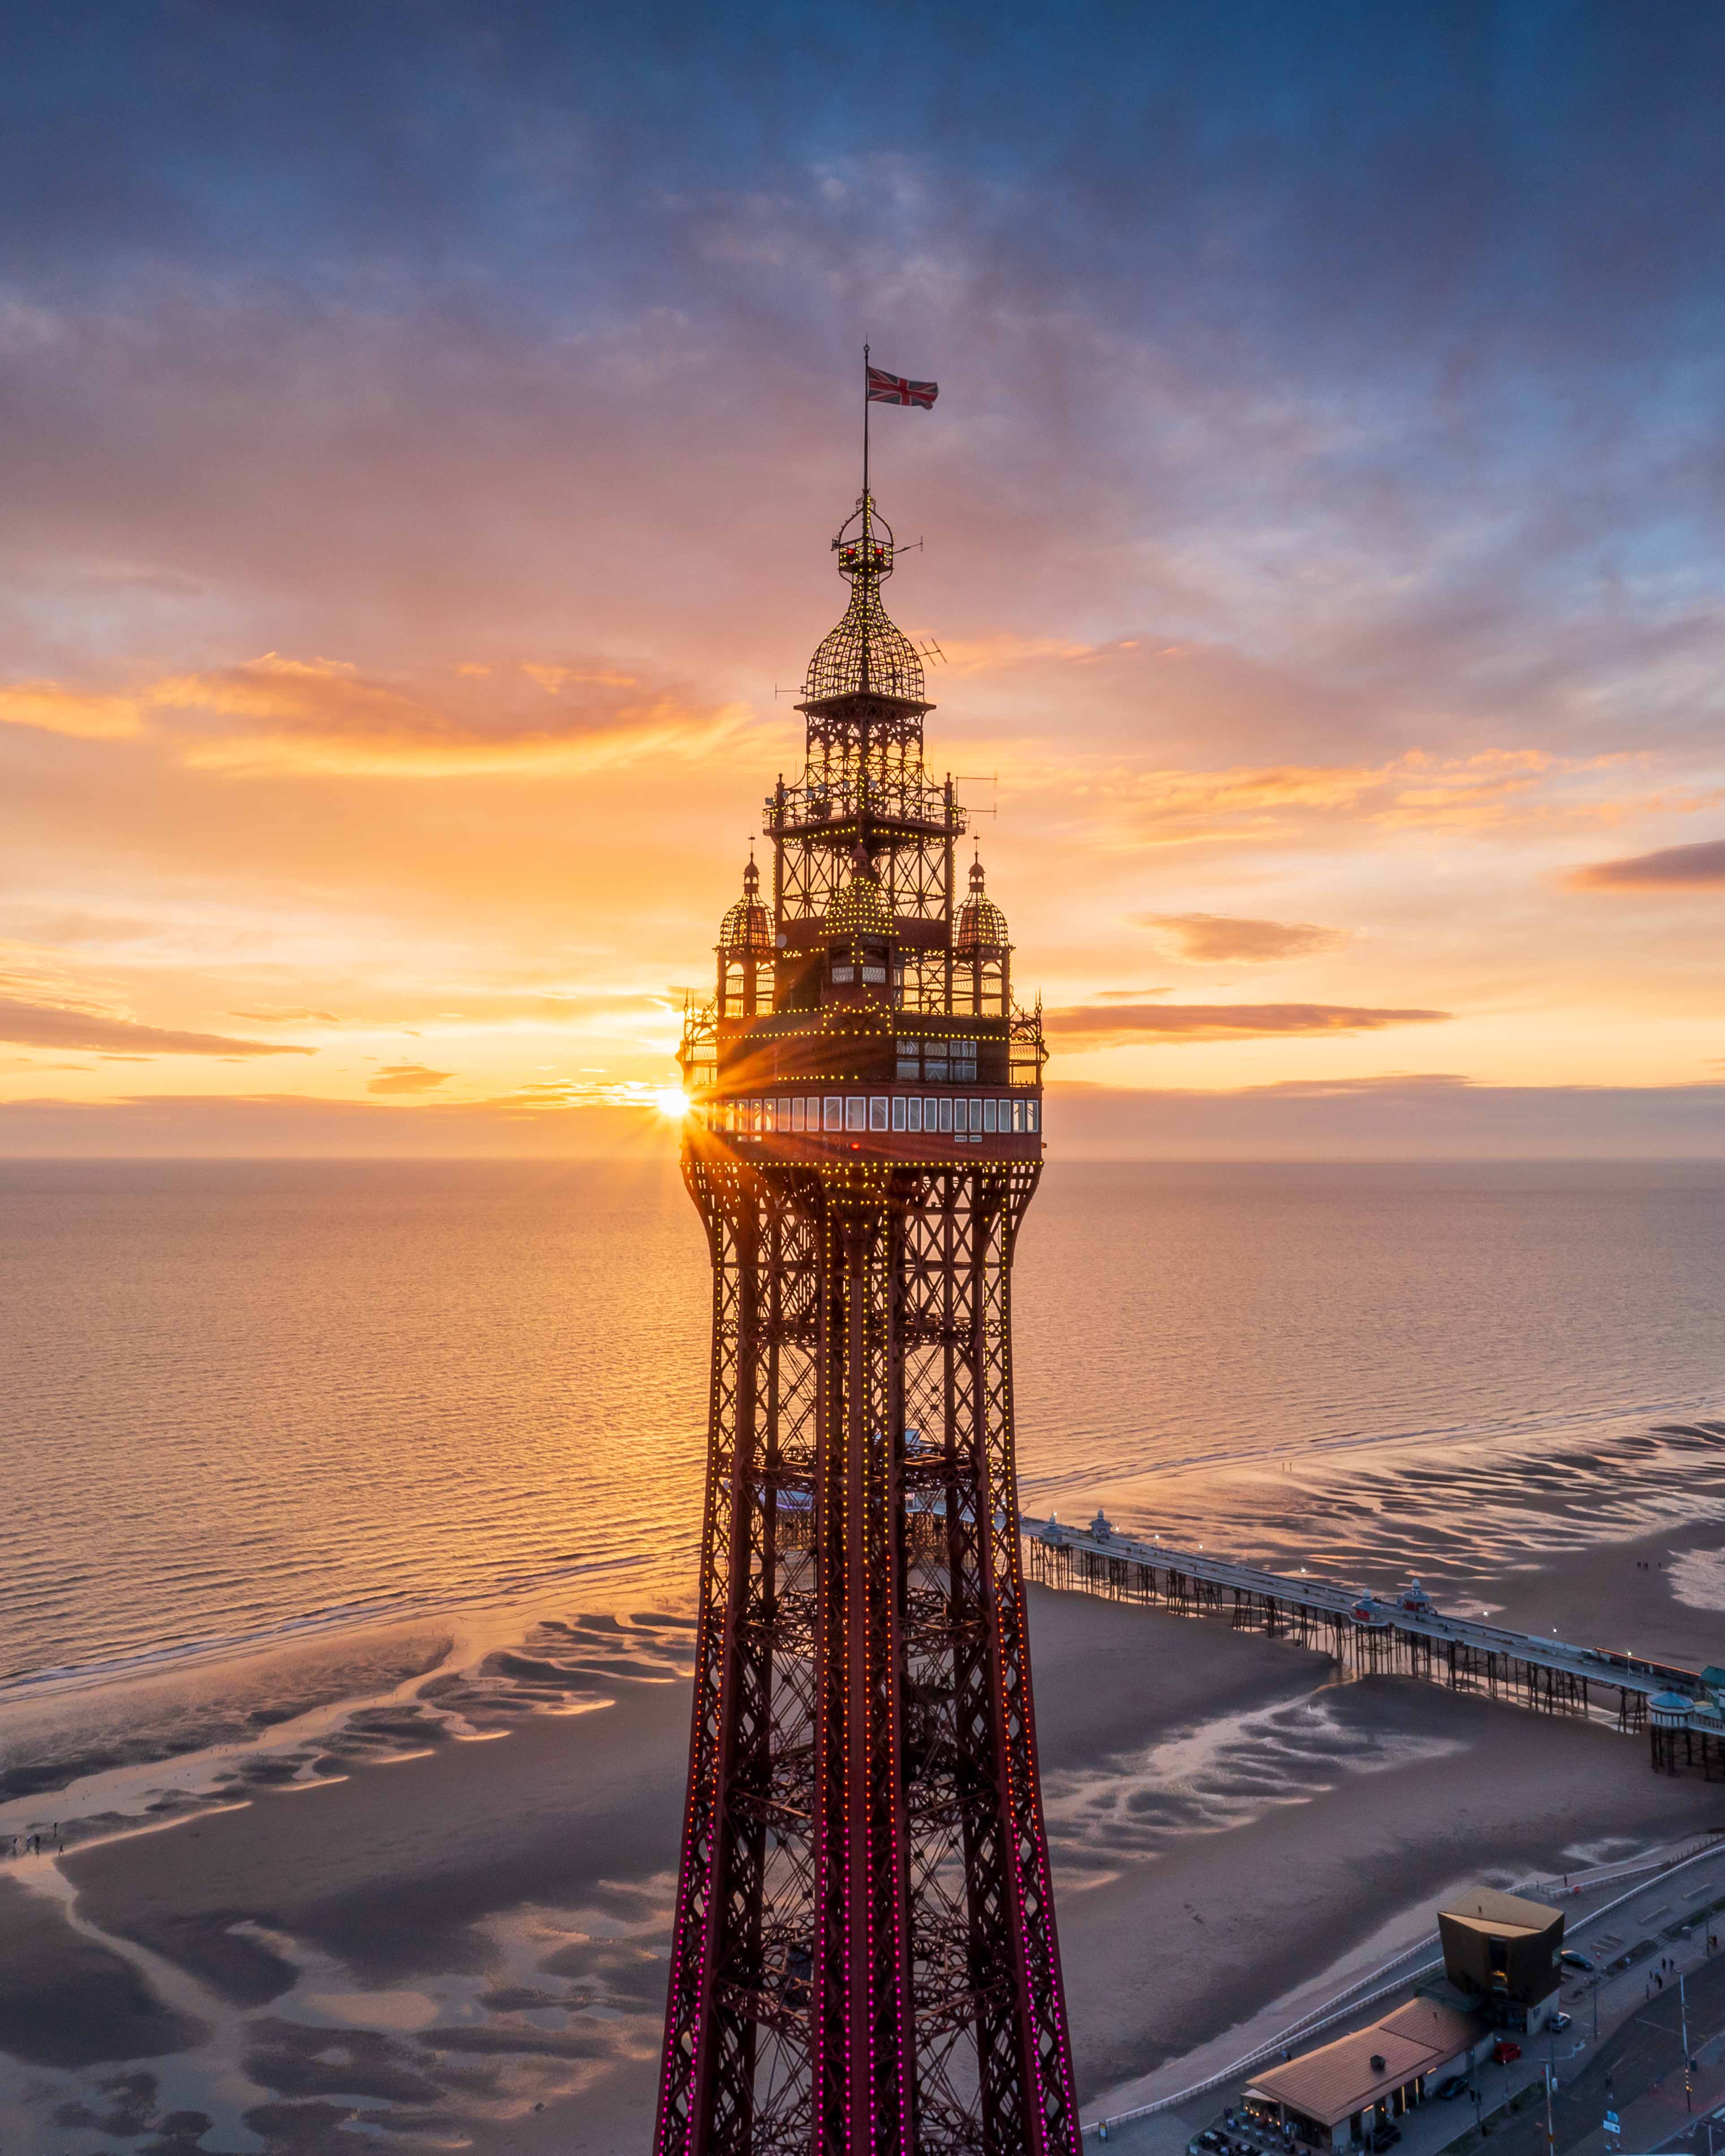 The Blackpool Tower at sunset